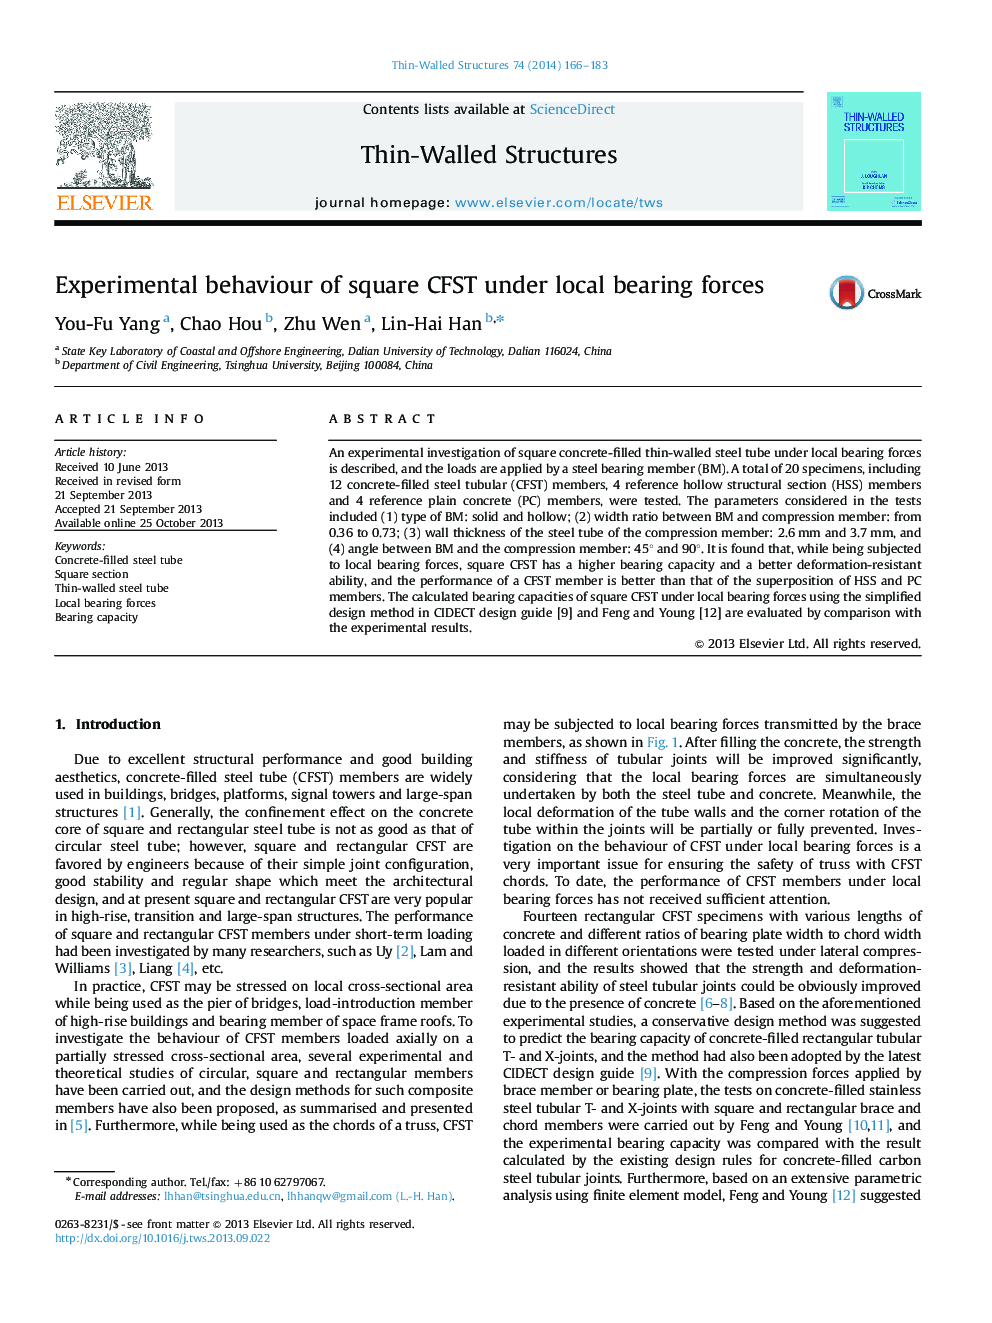 Experimental behaviour of square CFST under local bearing forces